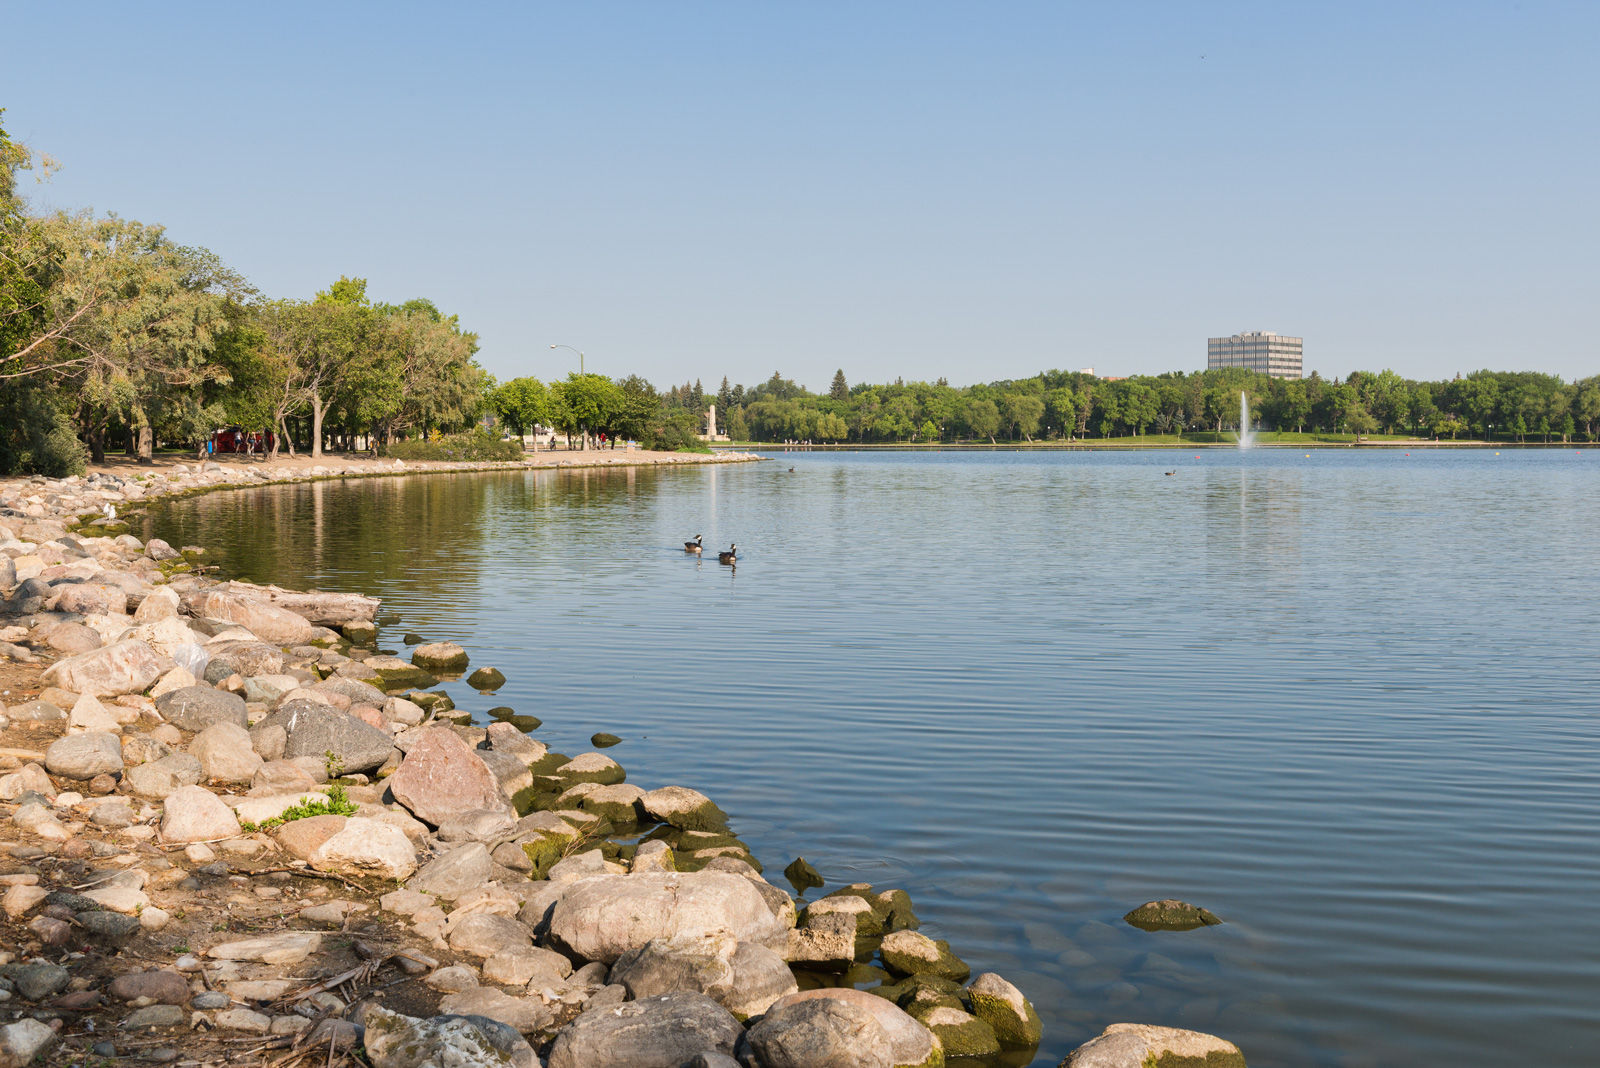 Locals, as well as visitors staying at pet friendly hotels in Regina enjoy walking their dogs at Wascana Lake Park.